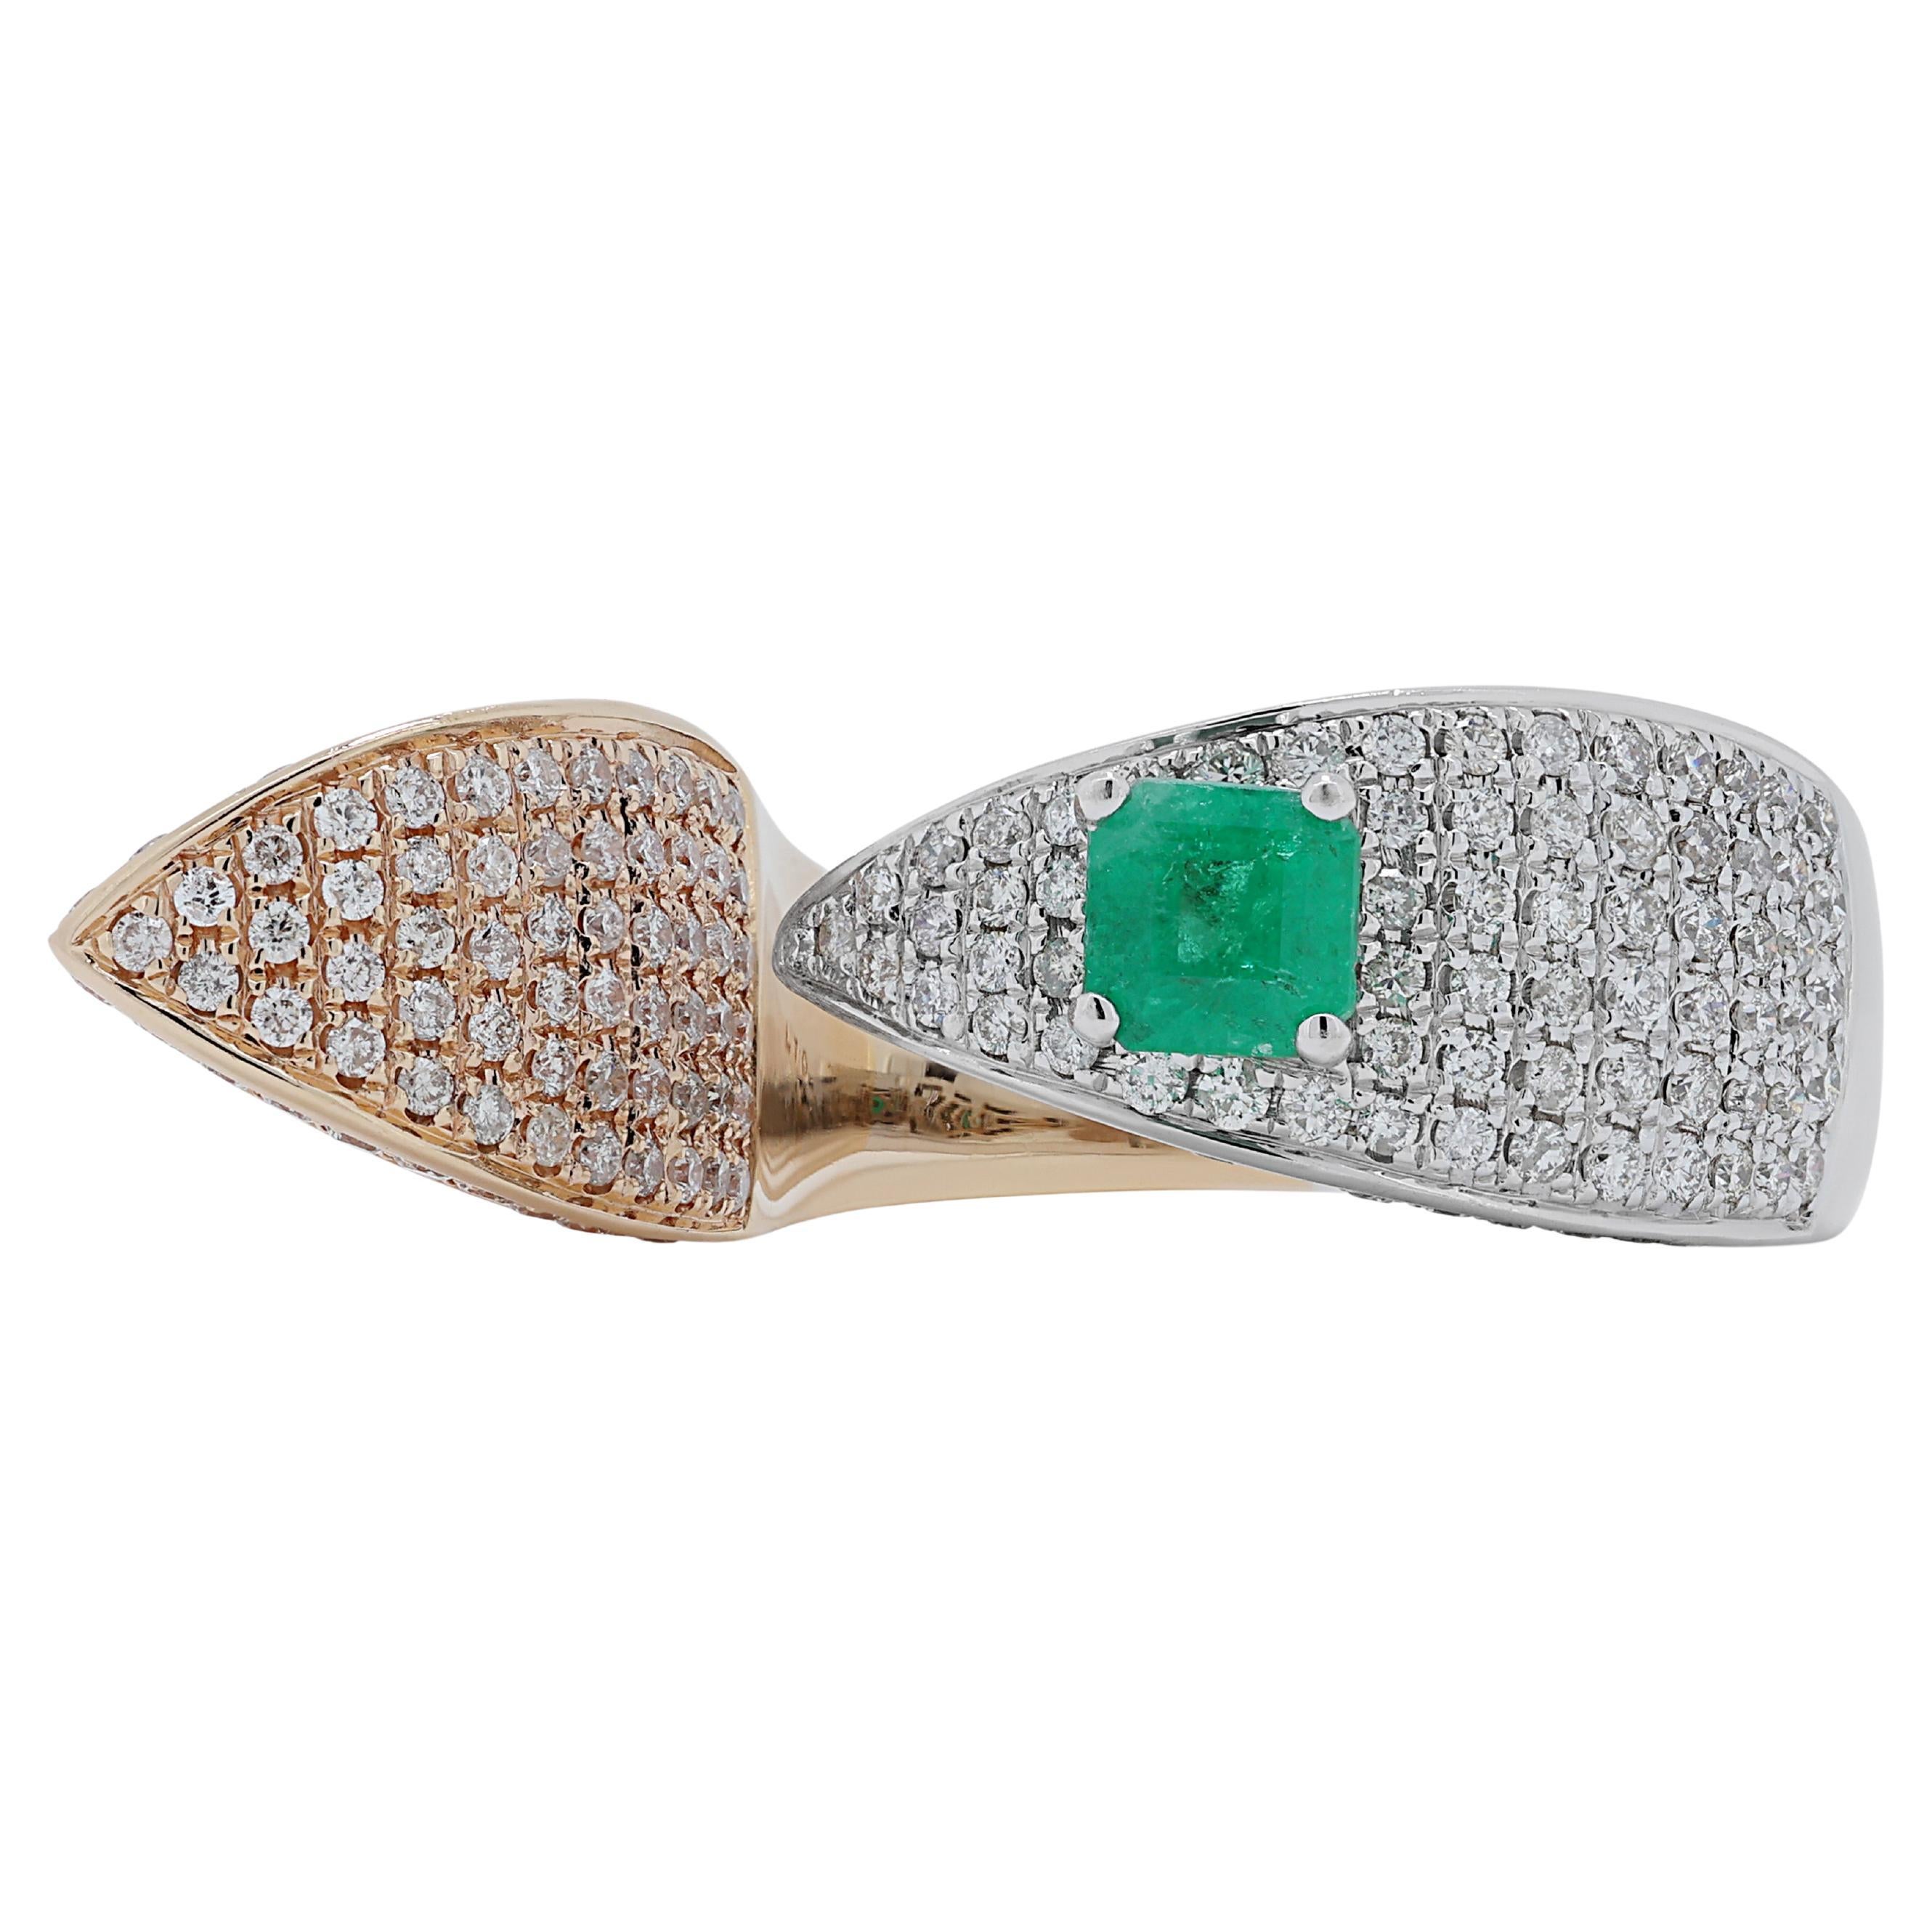 Majestic 0.47ct Emerald Ring with Diamonds in 18K White & Rose Gold 